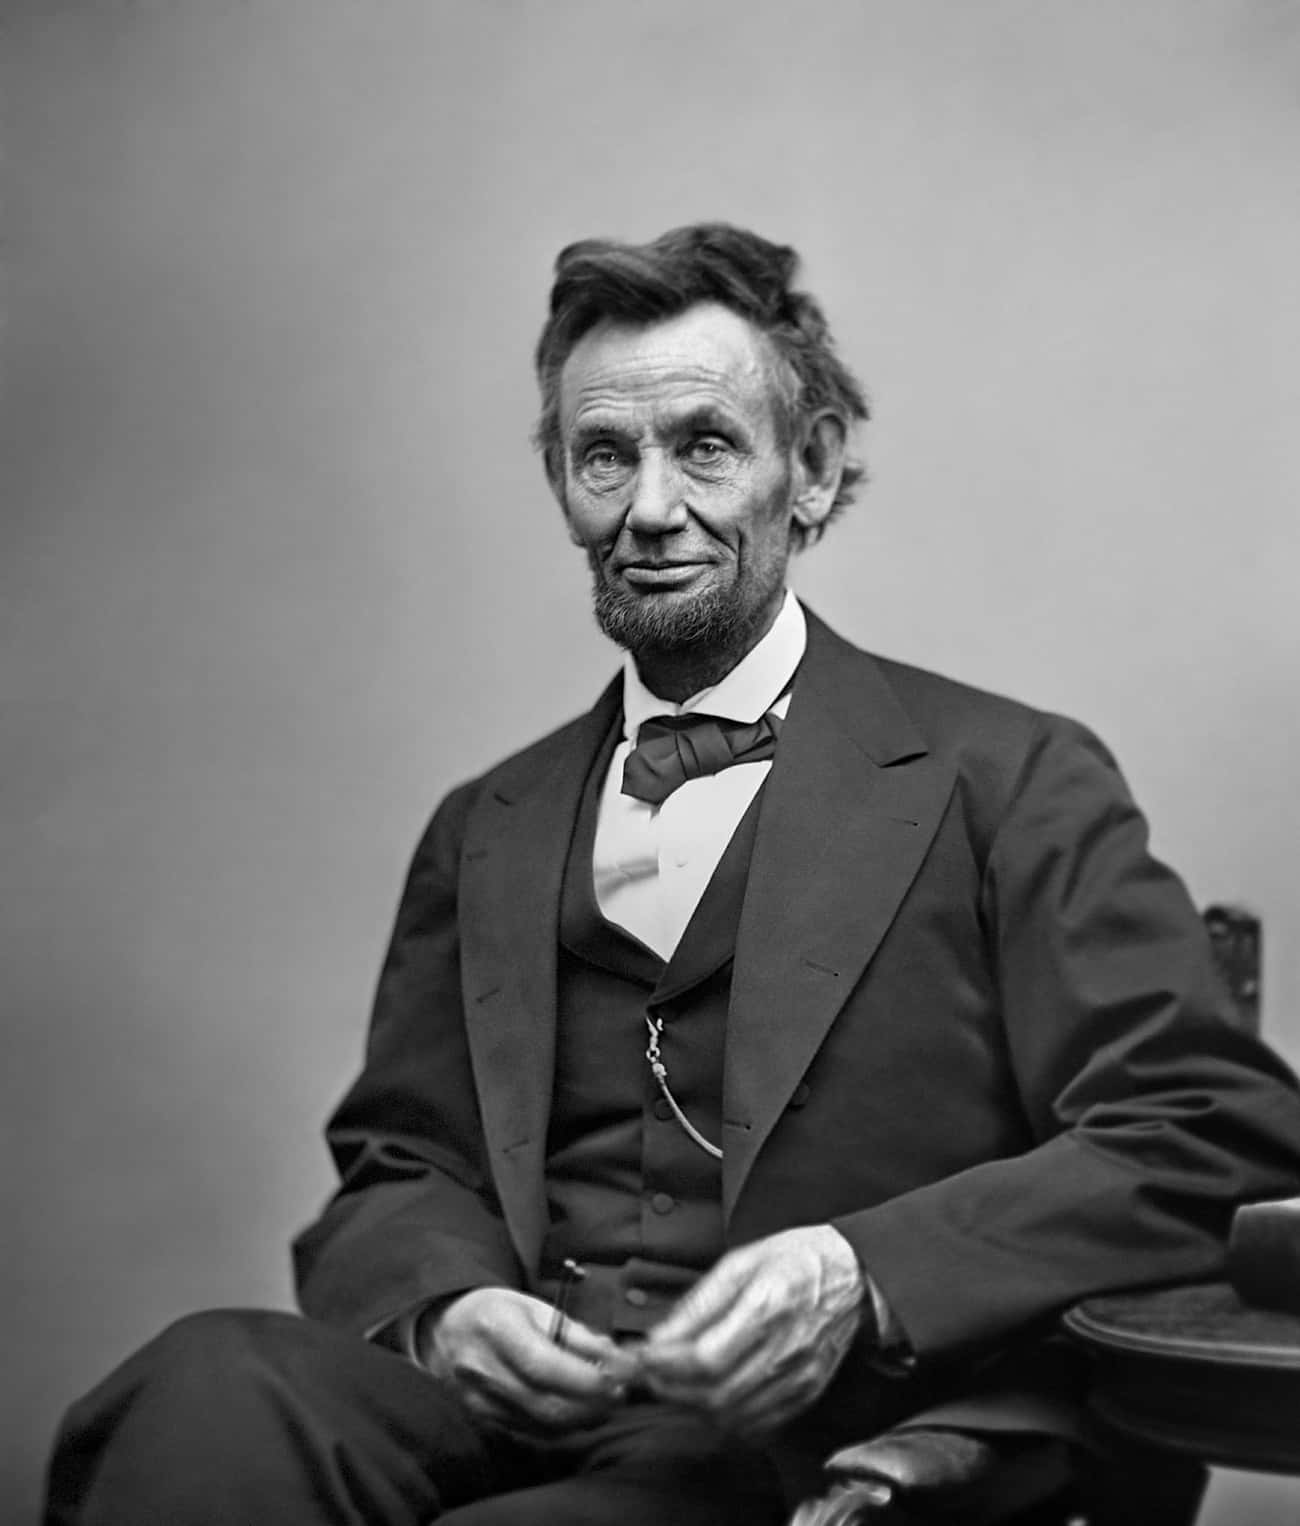 Abraham Lincoln Established The Agency The Day He Was Assassinated